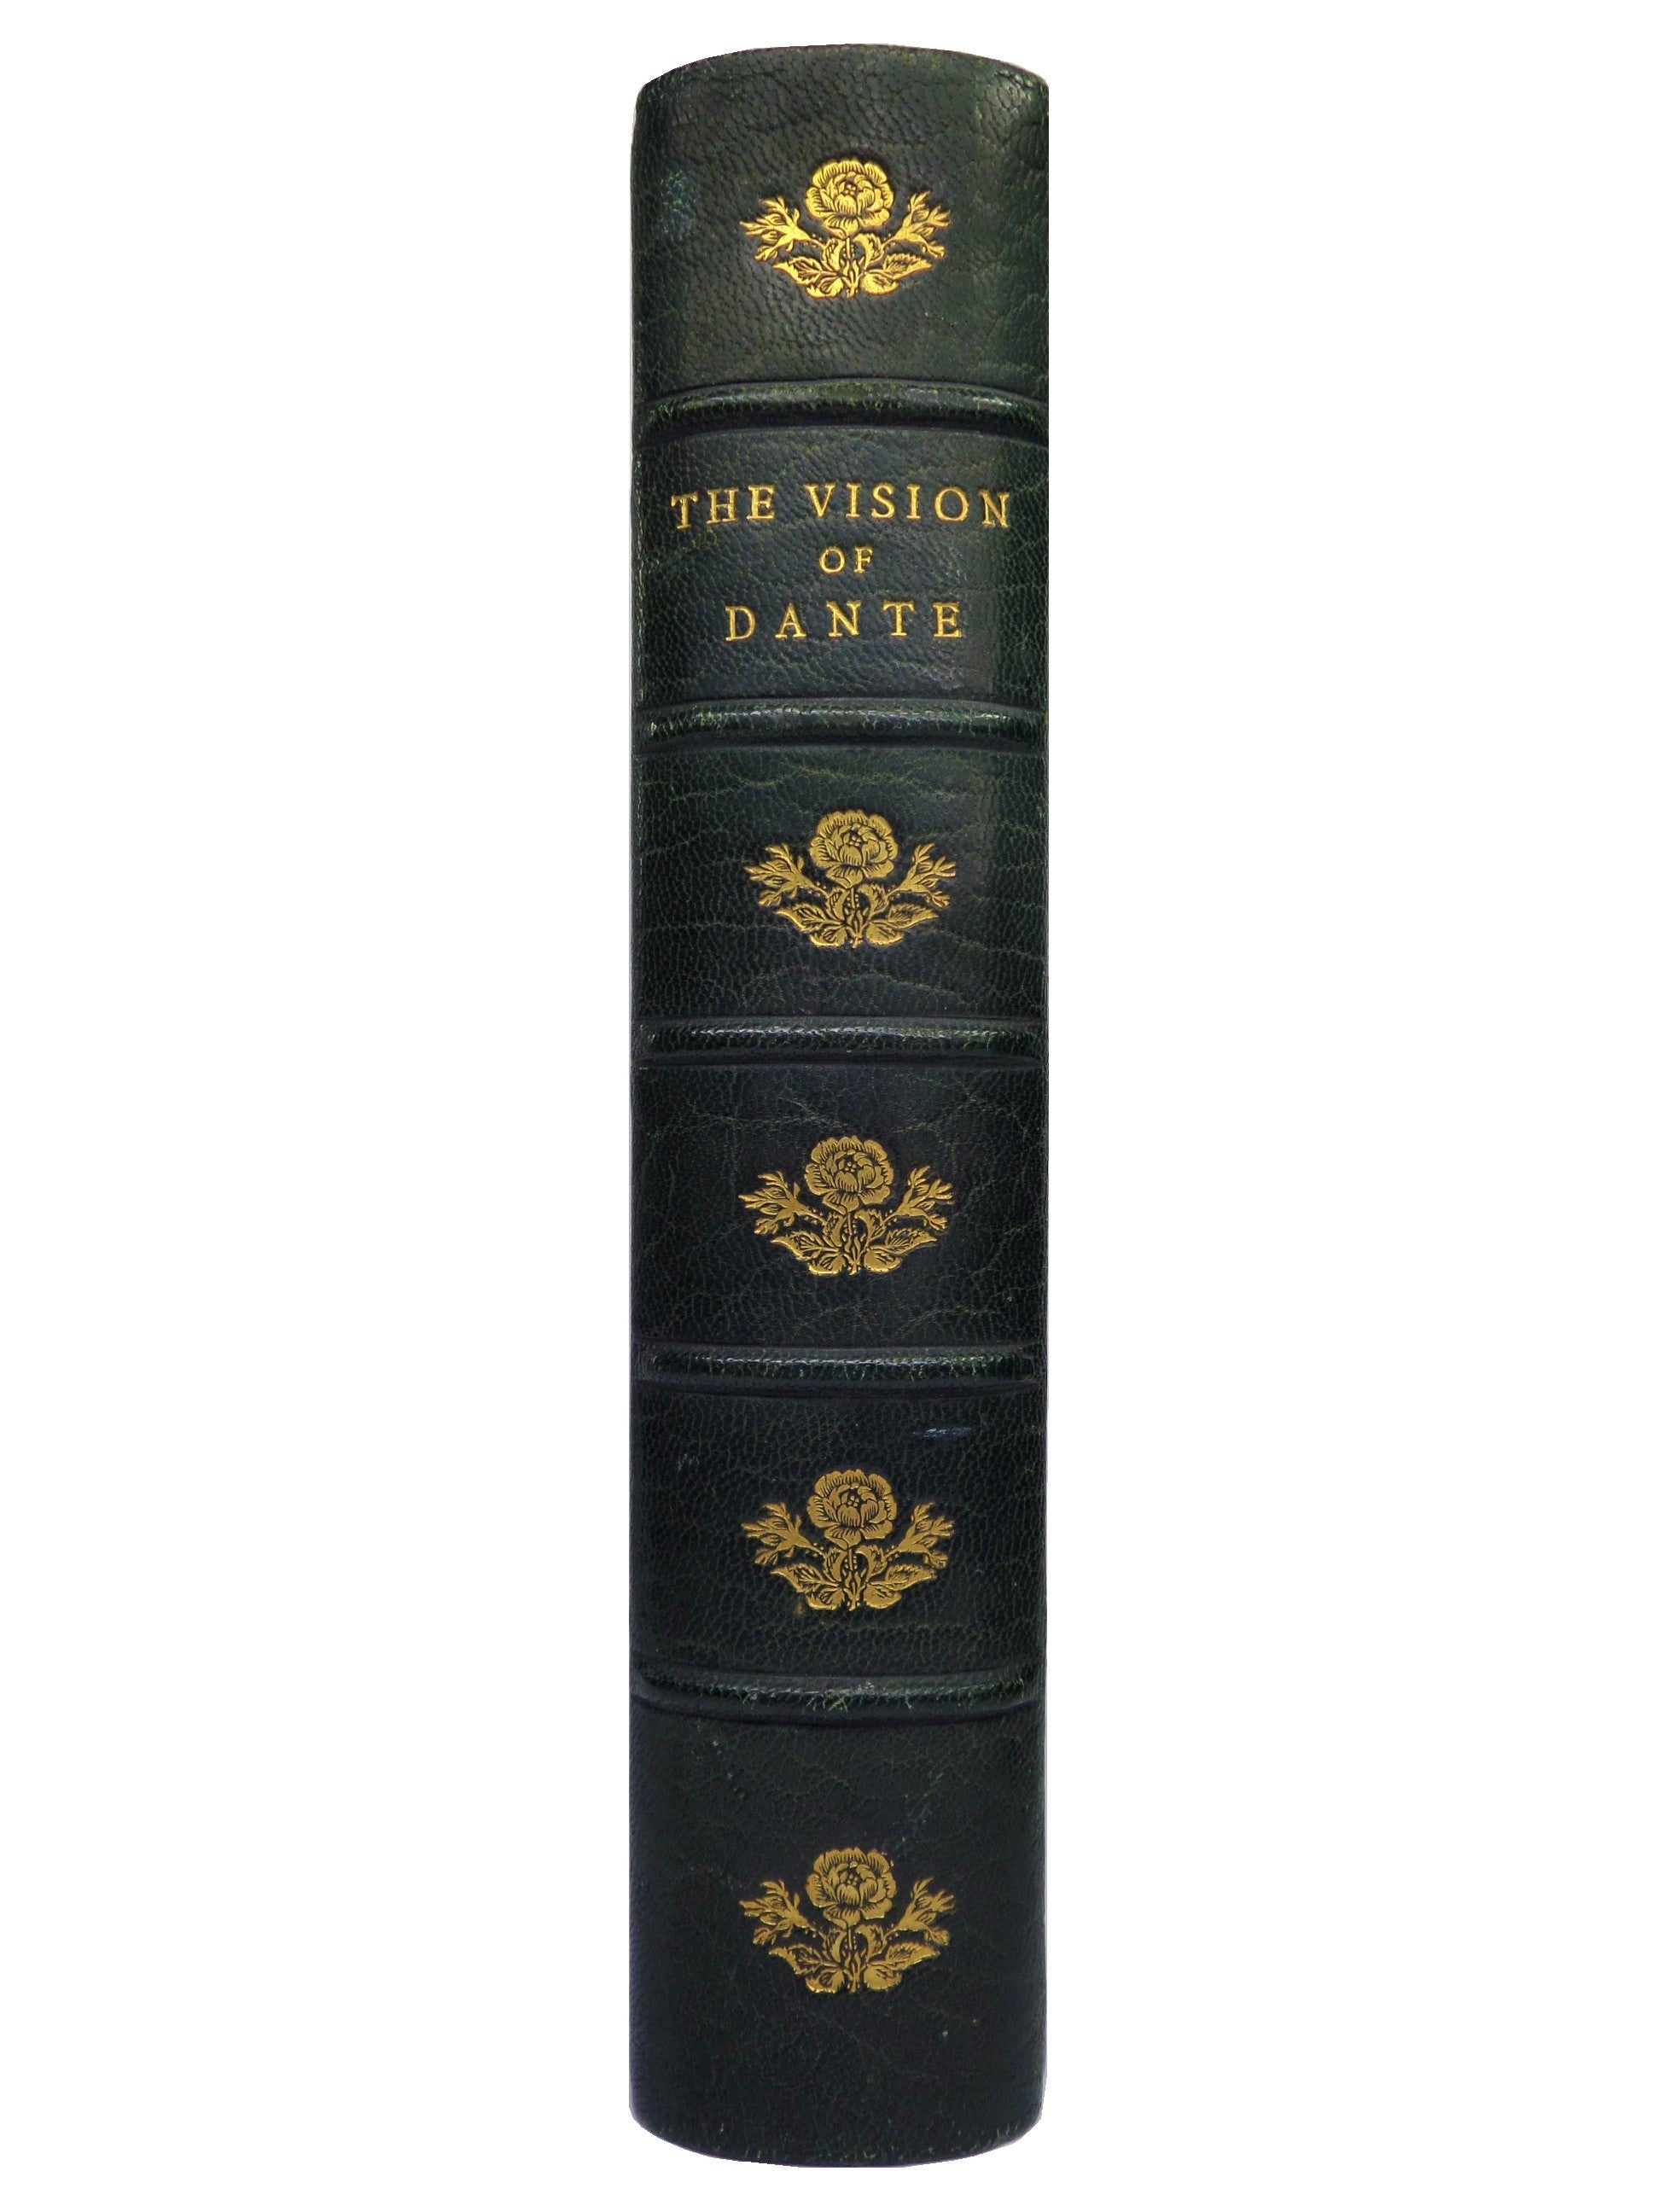 THE VISION; OR, HELL, PURGATORY, AND PARADISE BY DANTE ALIGHIERI, FINE BINDING